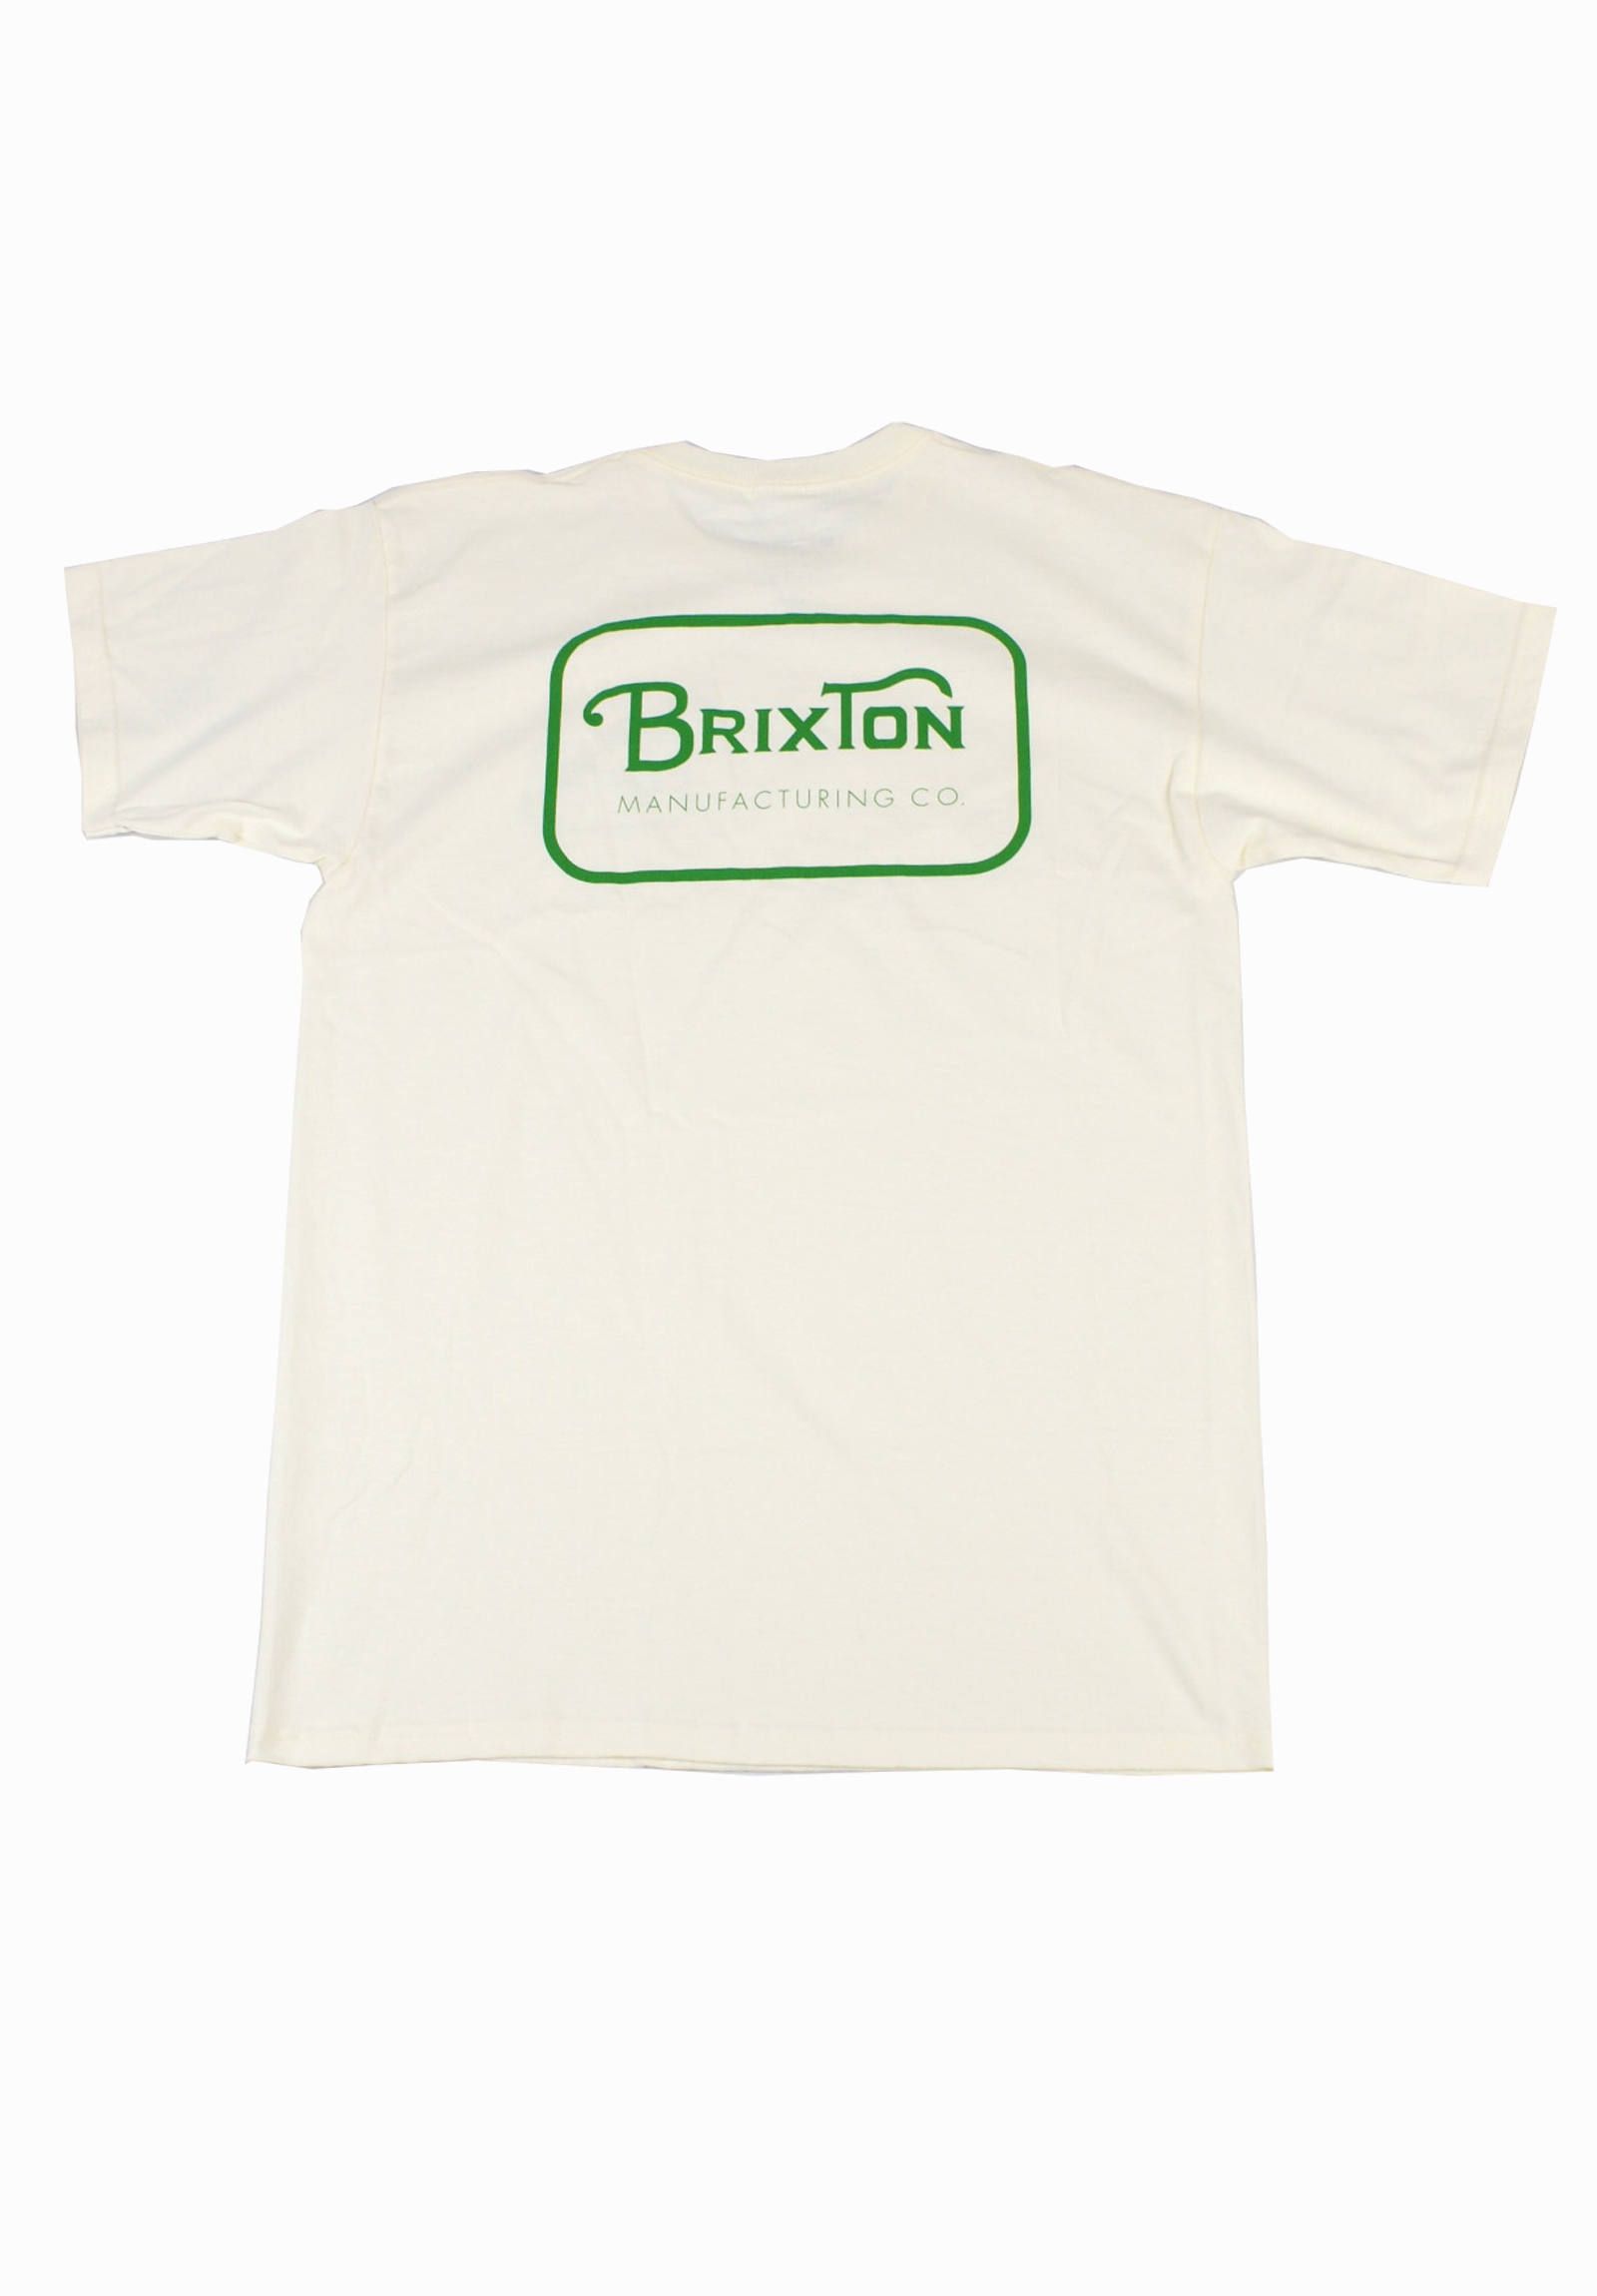 BRIXTON - ロゴTシャツ Grade T-Shirt -Off White/Green- | FROG's TAIL